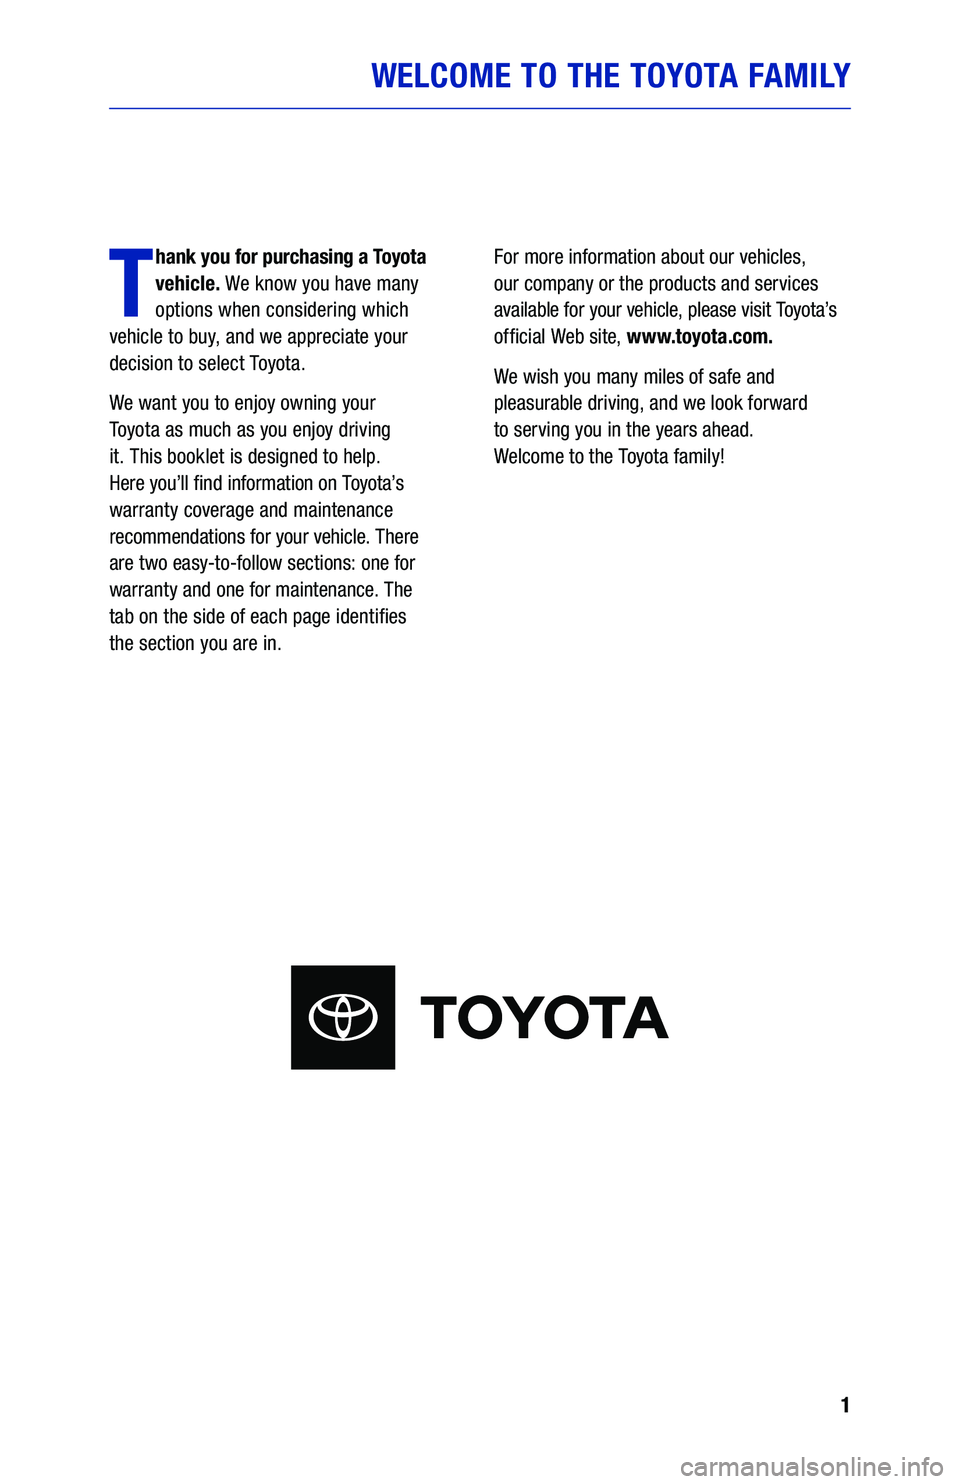 TOYOTA RAV4 2020  Warranties & Maintenance Guides (in English) 1
WELCOME TO THE TOYOTA FAMILY
T
hank you for purchasing a Toyota 
vehicle. We know you have many 
options when considering which   
vehicle to buy, and we appreciate your 
decision to select Toyota.
